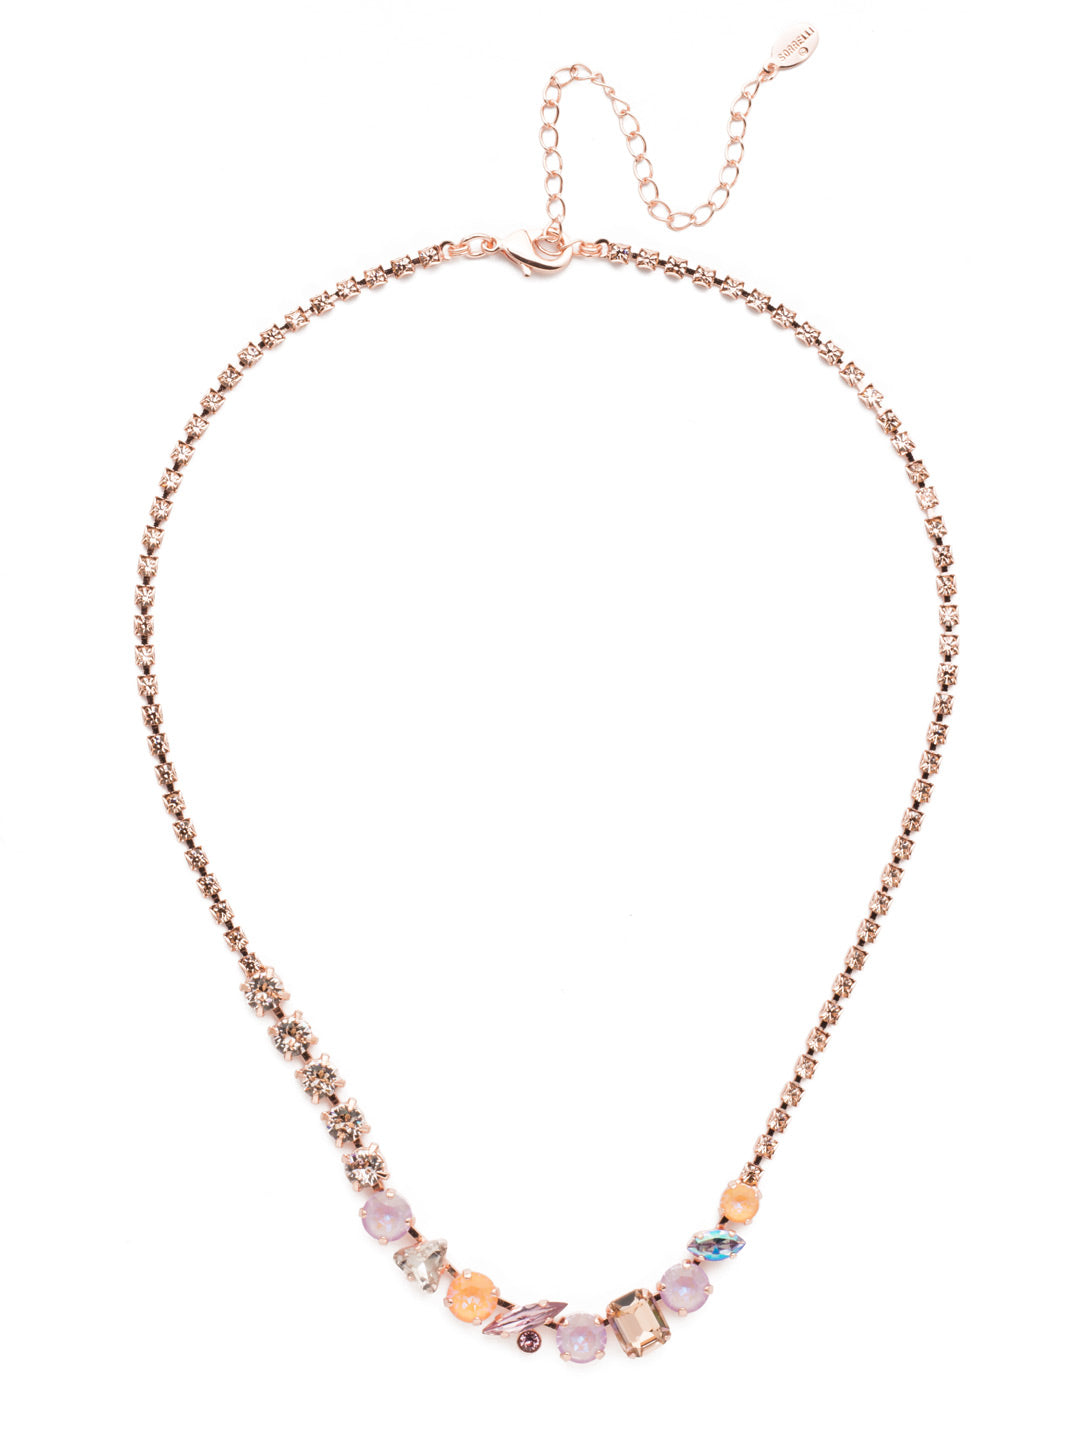 Vivienne Tennis Necklace - NEN16RGLVP - <p>The Vivienna Tennis Necklace showcases classic beauty and sparkle in a variety of crystal shapes that really bring on the bling. From Sorrelli's Lavender Peach collection in our Rose Gold-tone finish.</p>